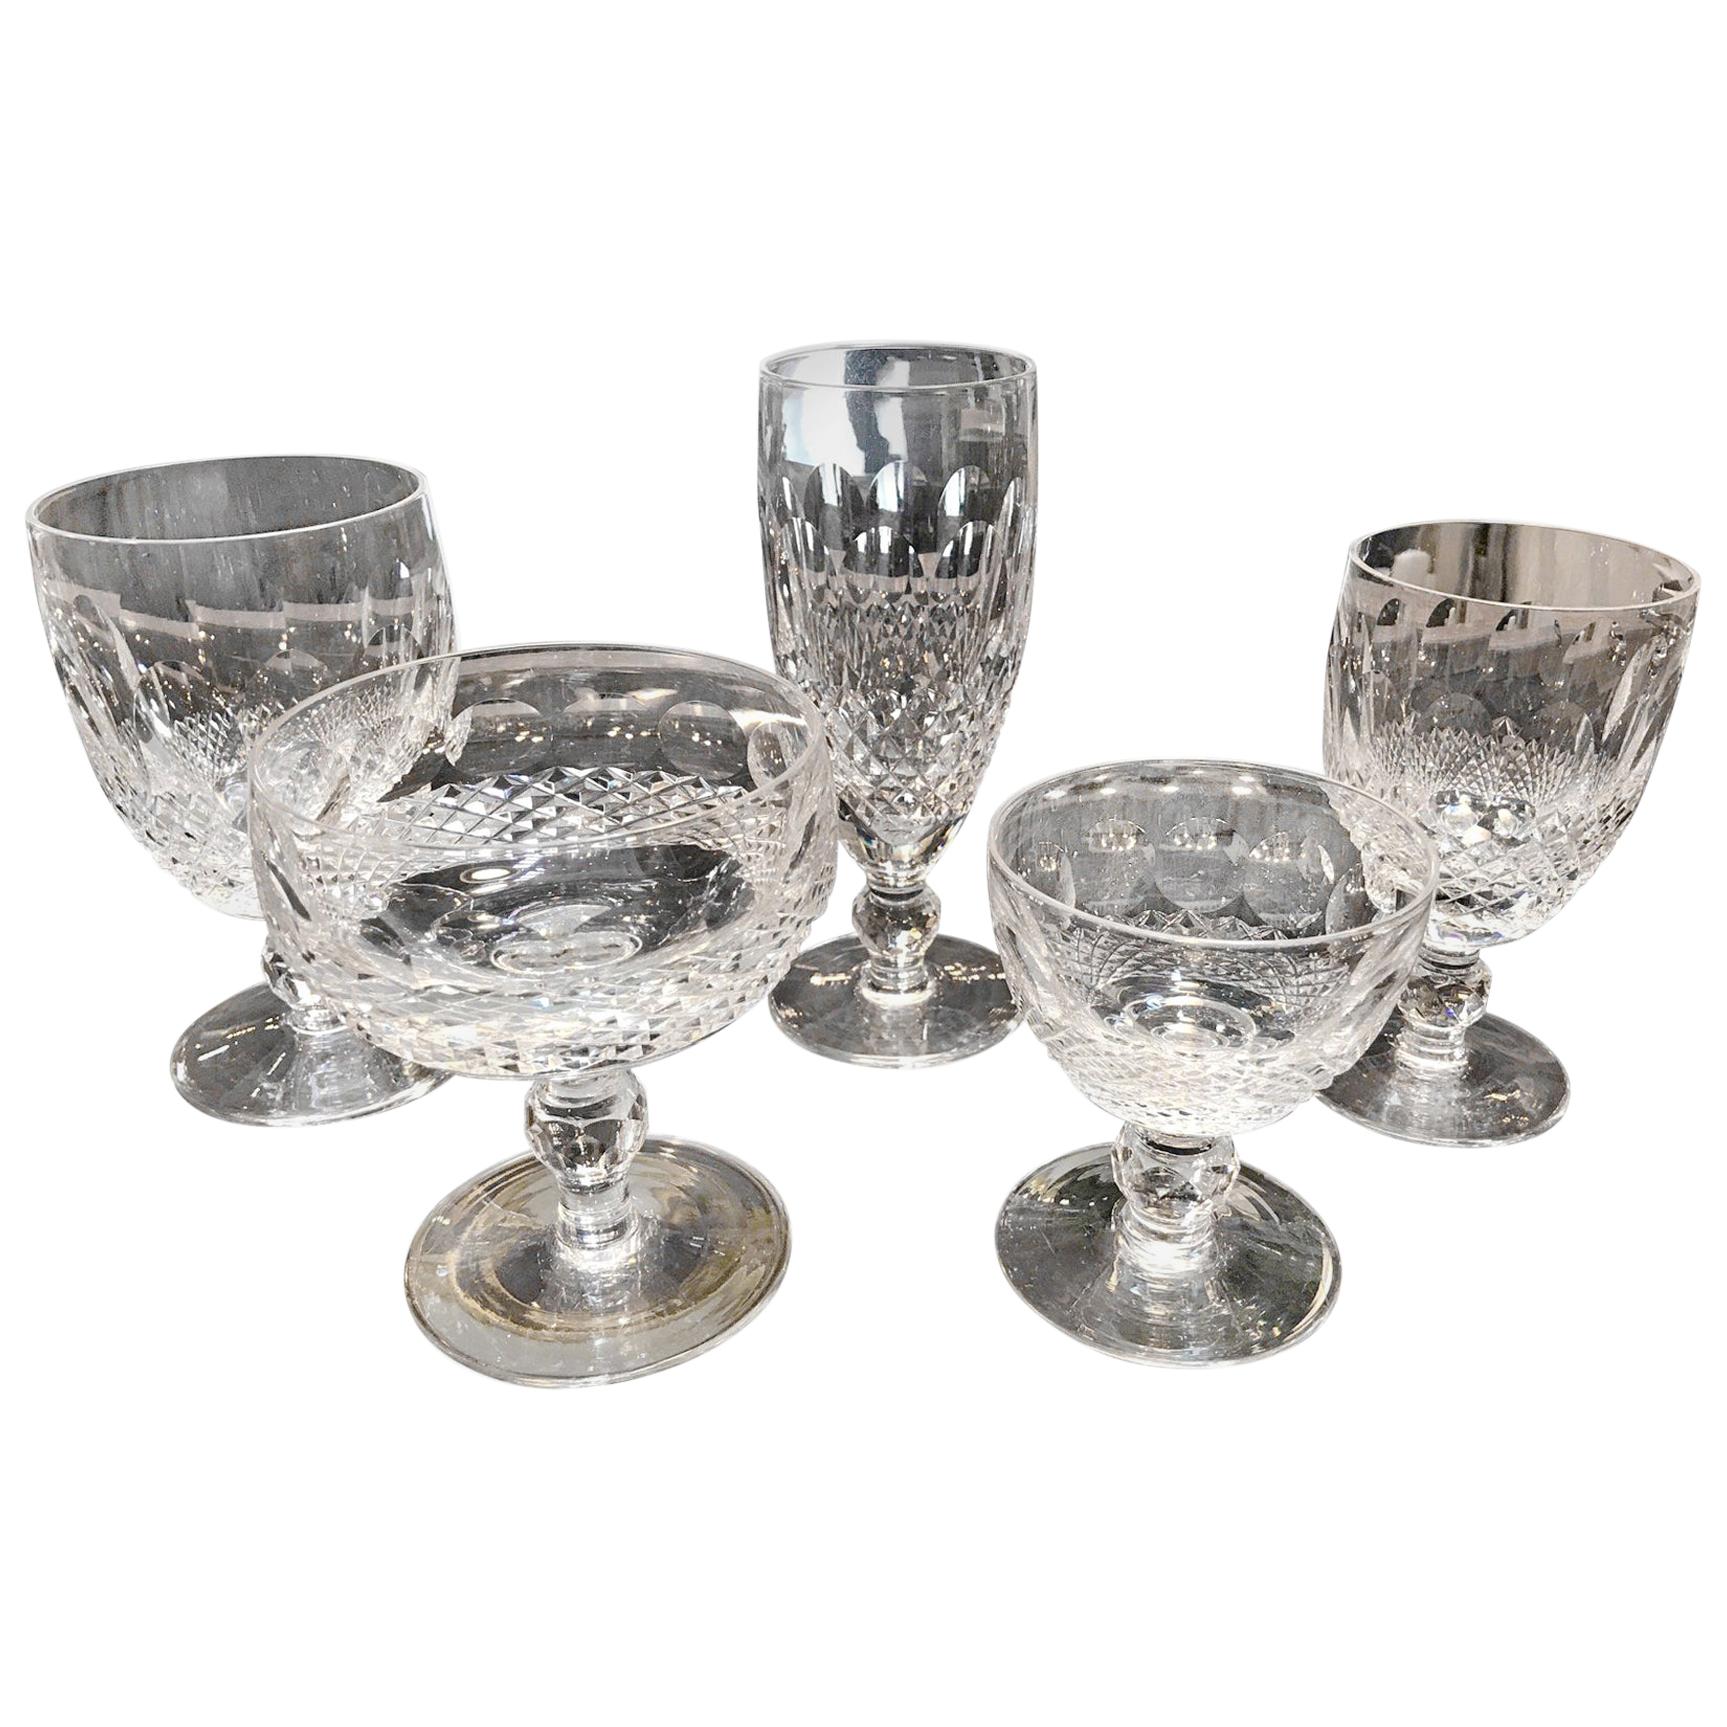 60 Piece Set of Handcut Irish Crystal Stemware by Waterford Colleen